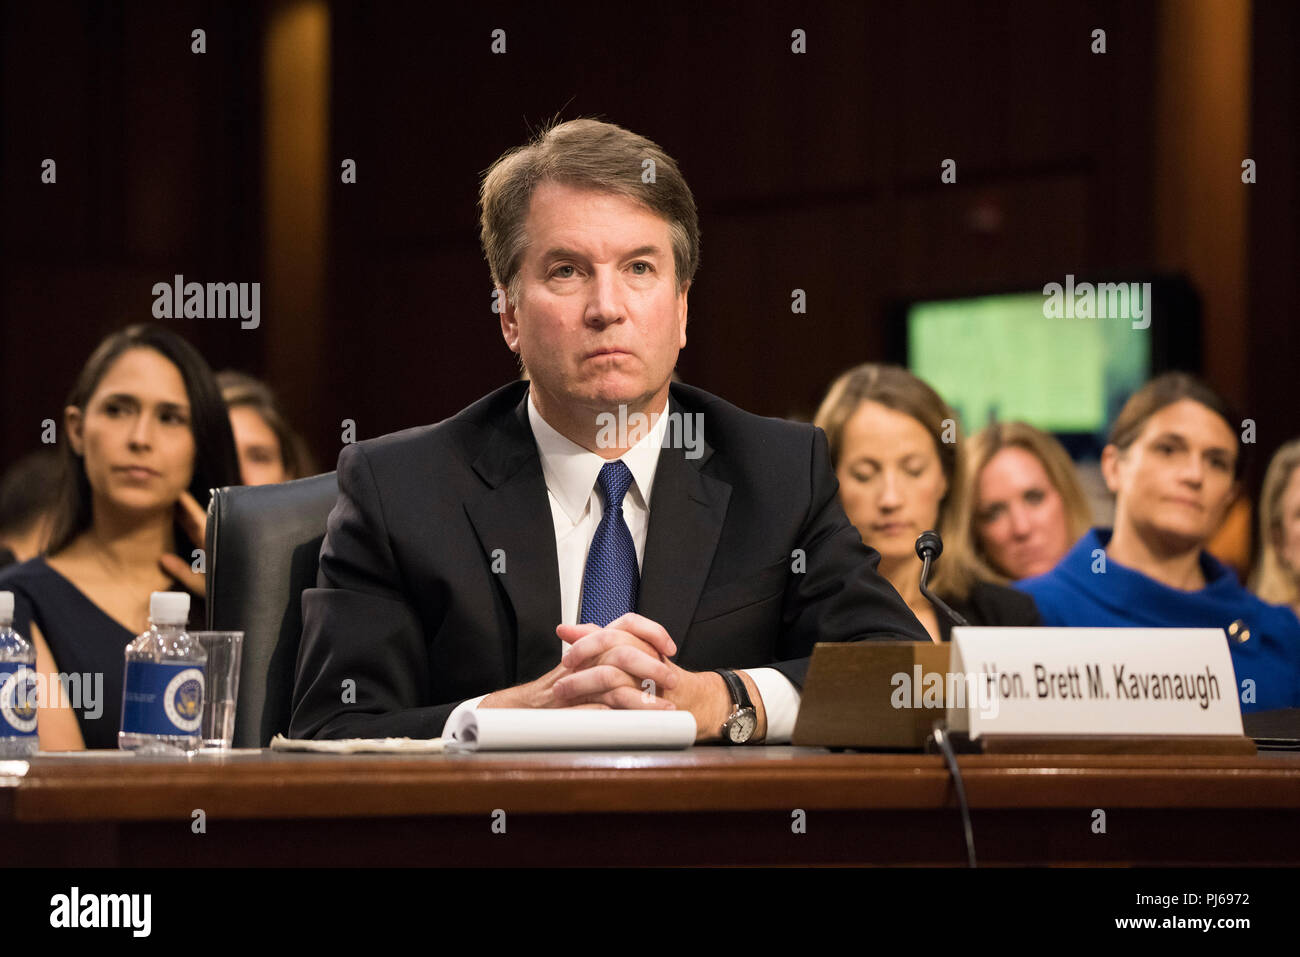 Washington DC, USA. 4th September 2018. Judge Brett Kavanaugh attends his confirmation hearing to become the next Supreme Court Justice on Capitol Hill in Washington DC.   Patsy Lynch/Alamy Credit: Patsy Lynch/Alamy Live News Stock Photo